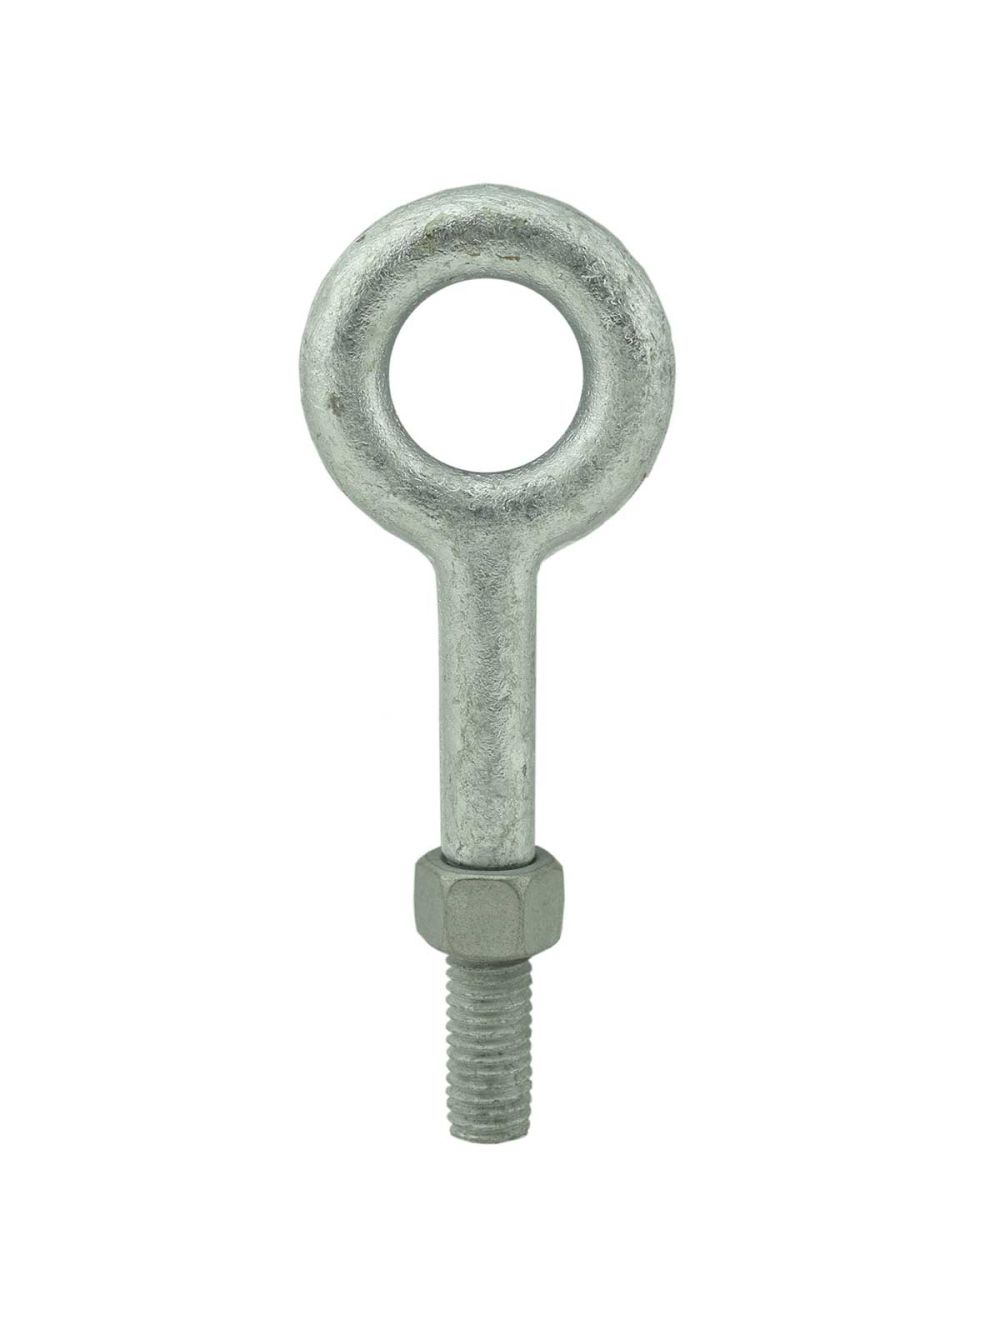 4  Hot Dip Galvanized Forged Eye Bolt with Nut Washer 5/8" x 12" 